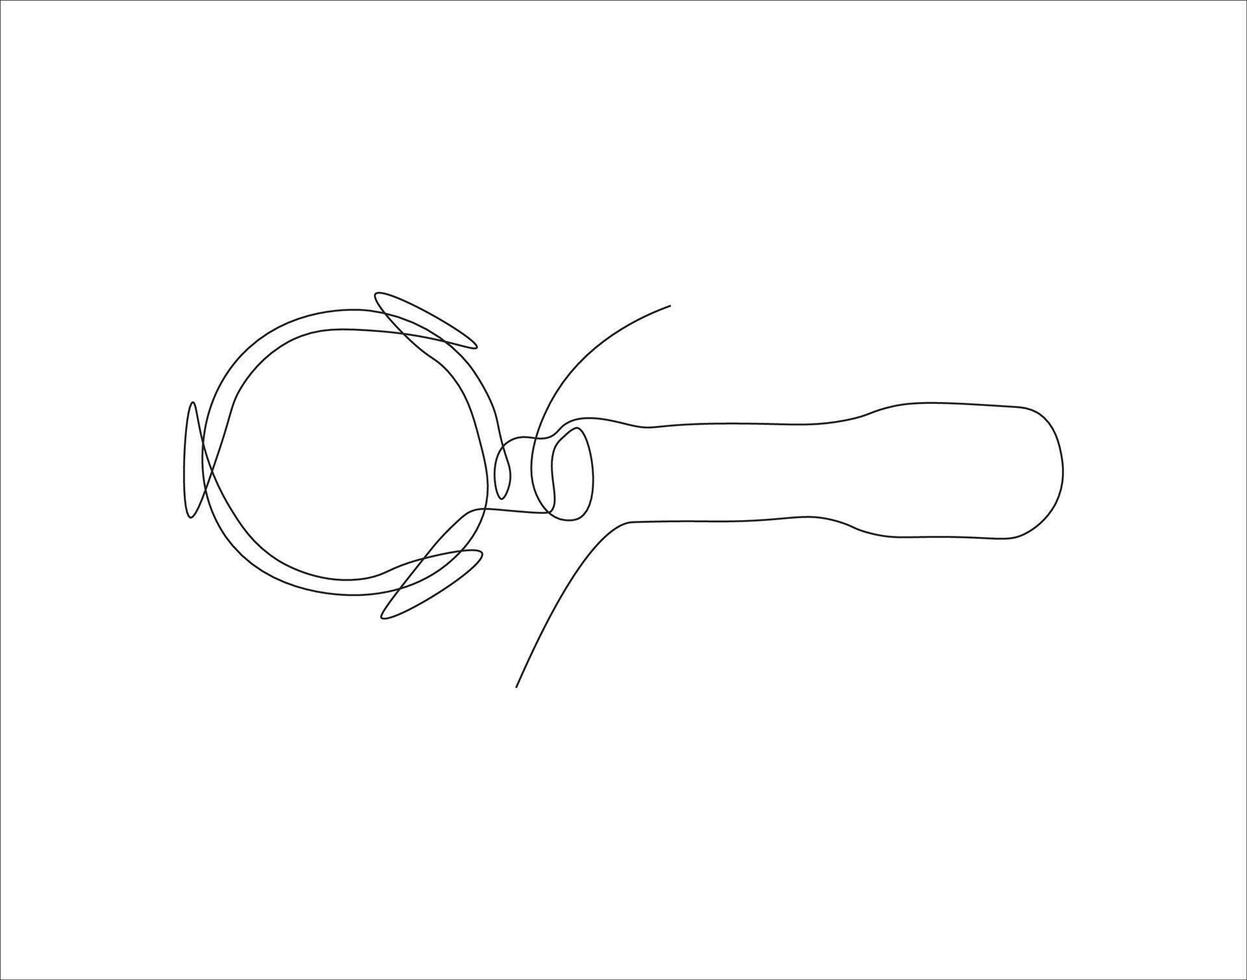 Continuous Line Drawing Of Portalfilter. One Line Of Portafilter Machine. Portafilter Coffee Continuous Line Art. Editable Outline. vector